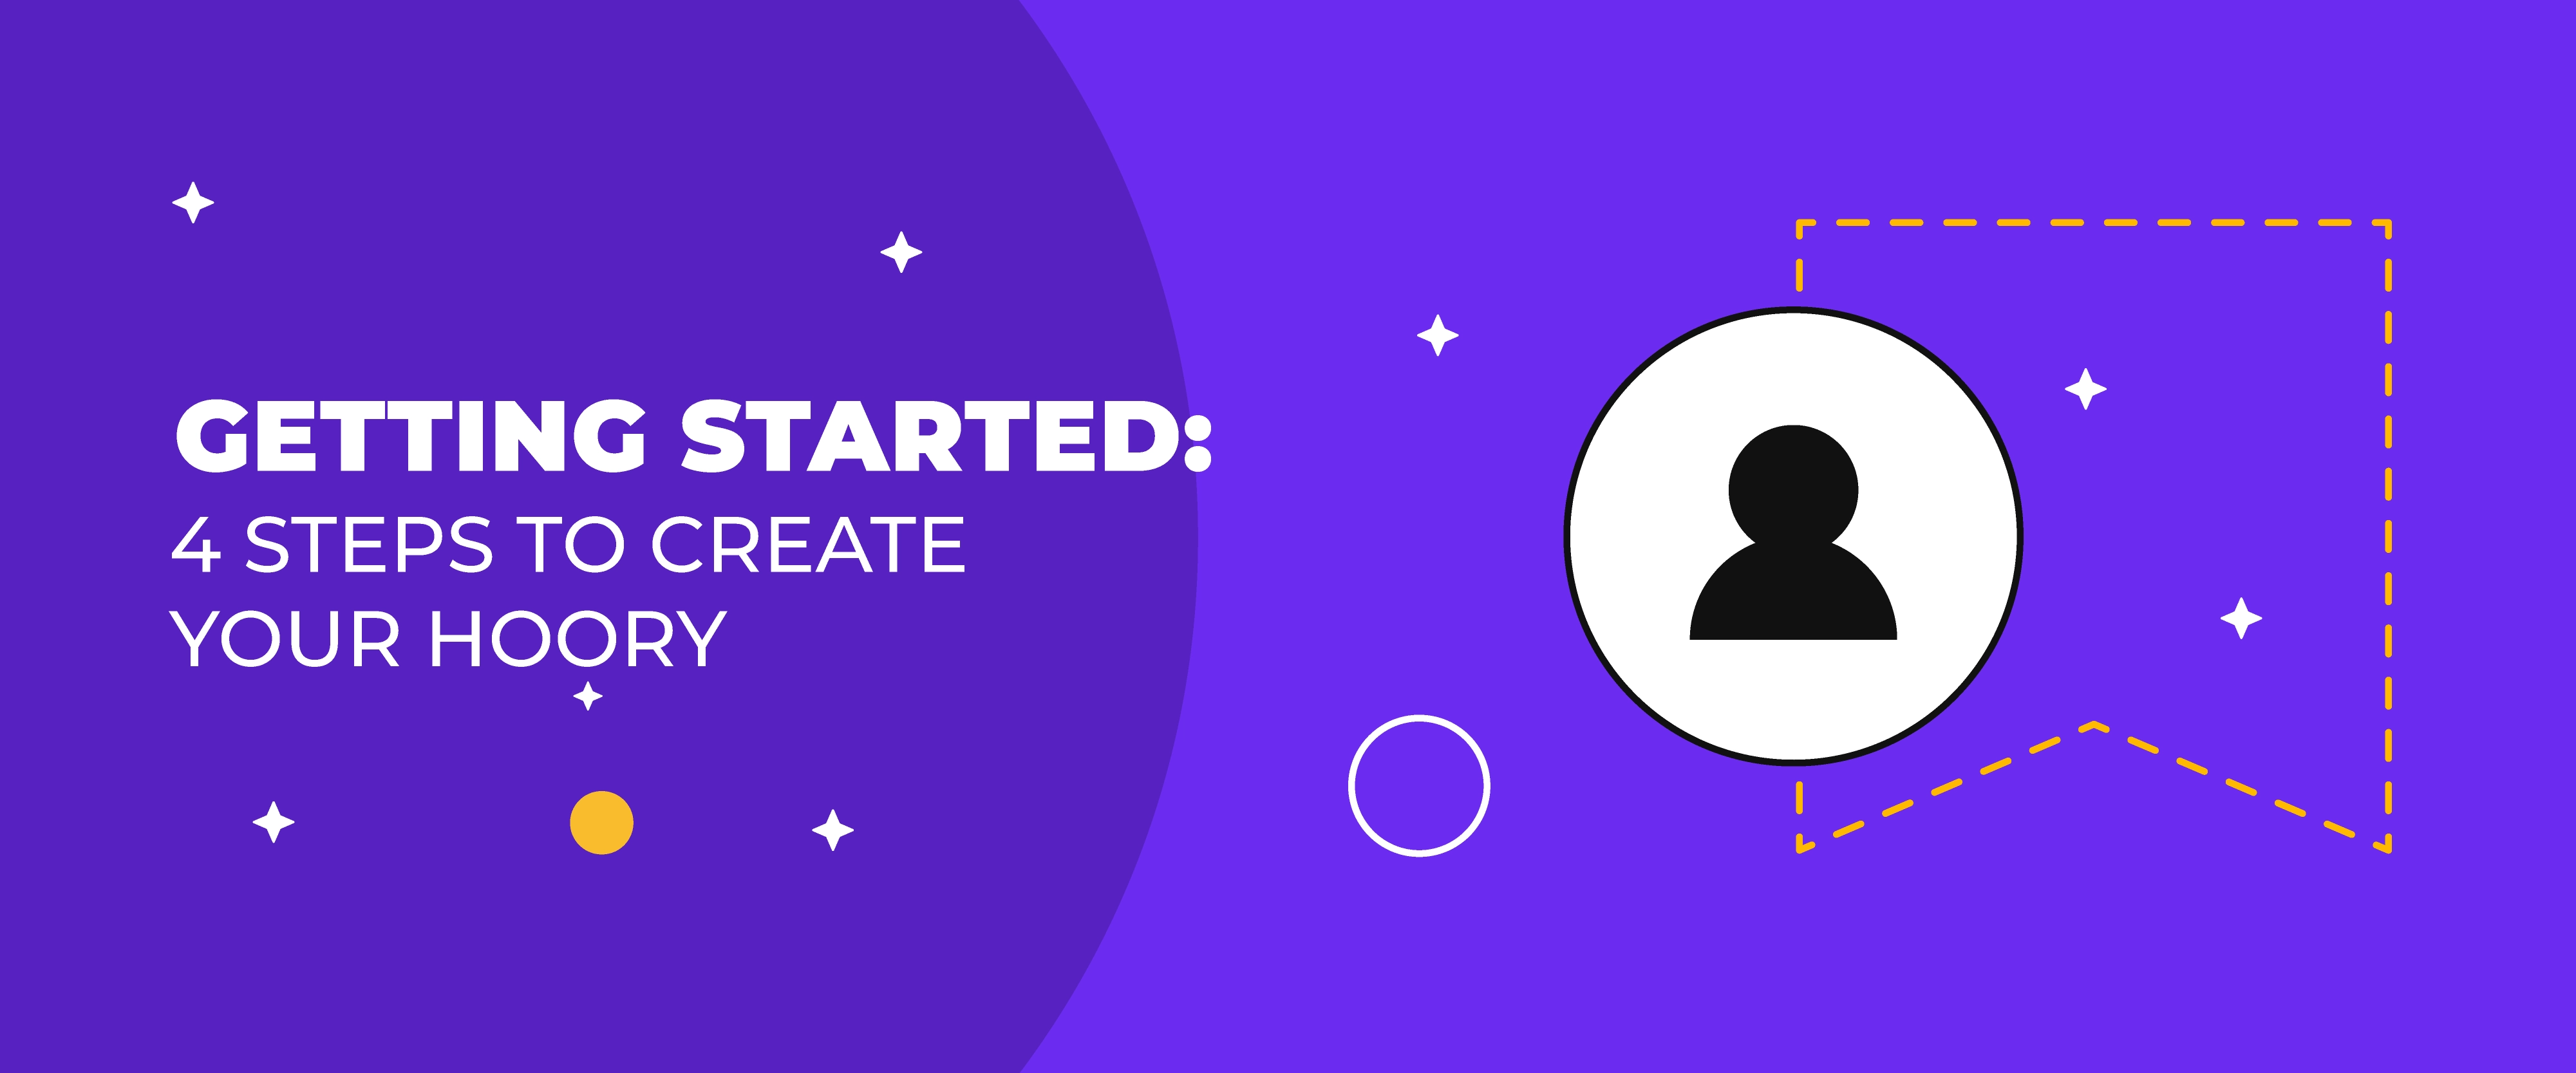 Getting Started: 4 Steps to Create Your Hoory